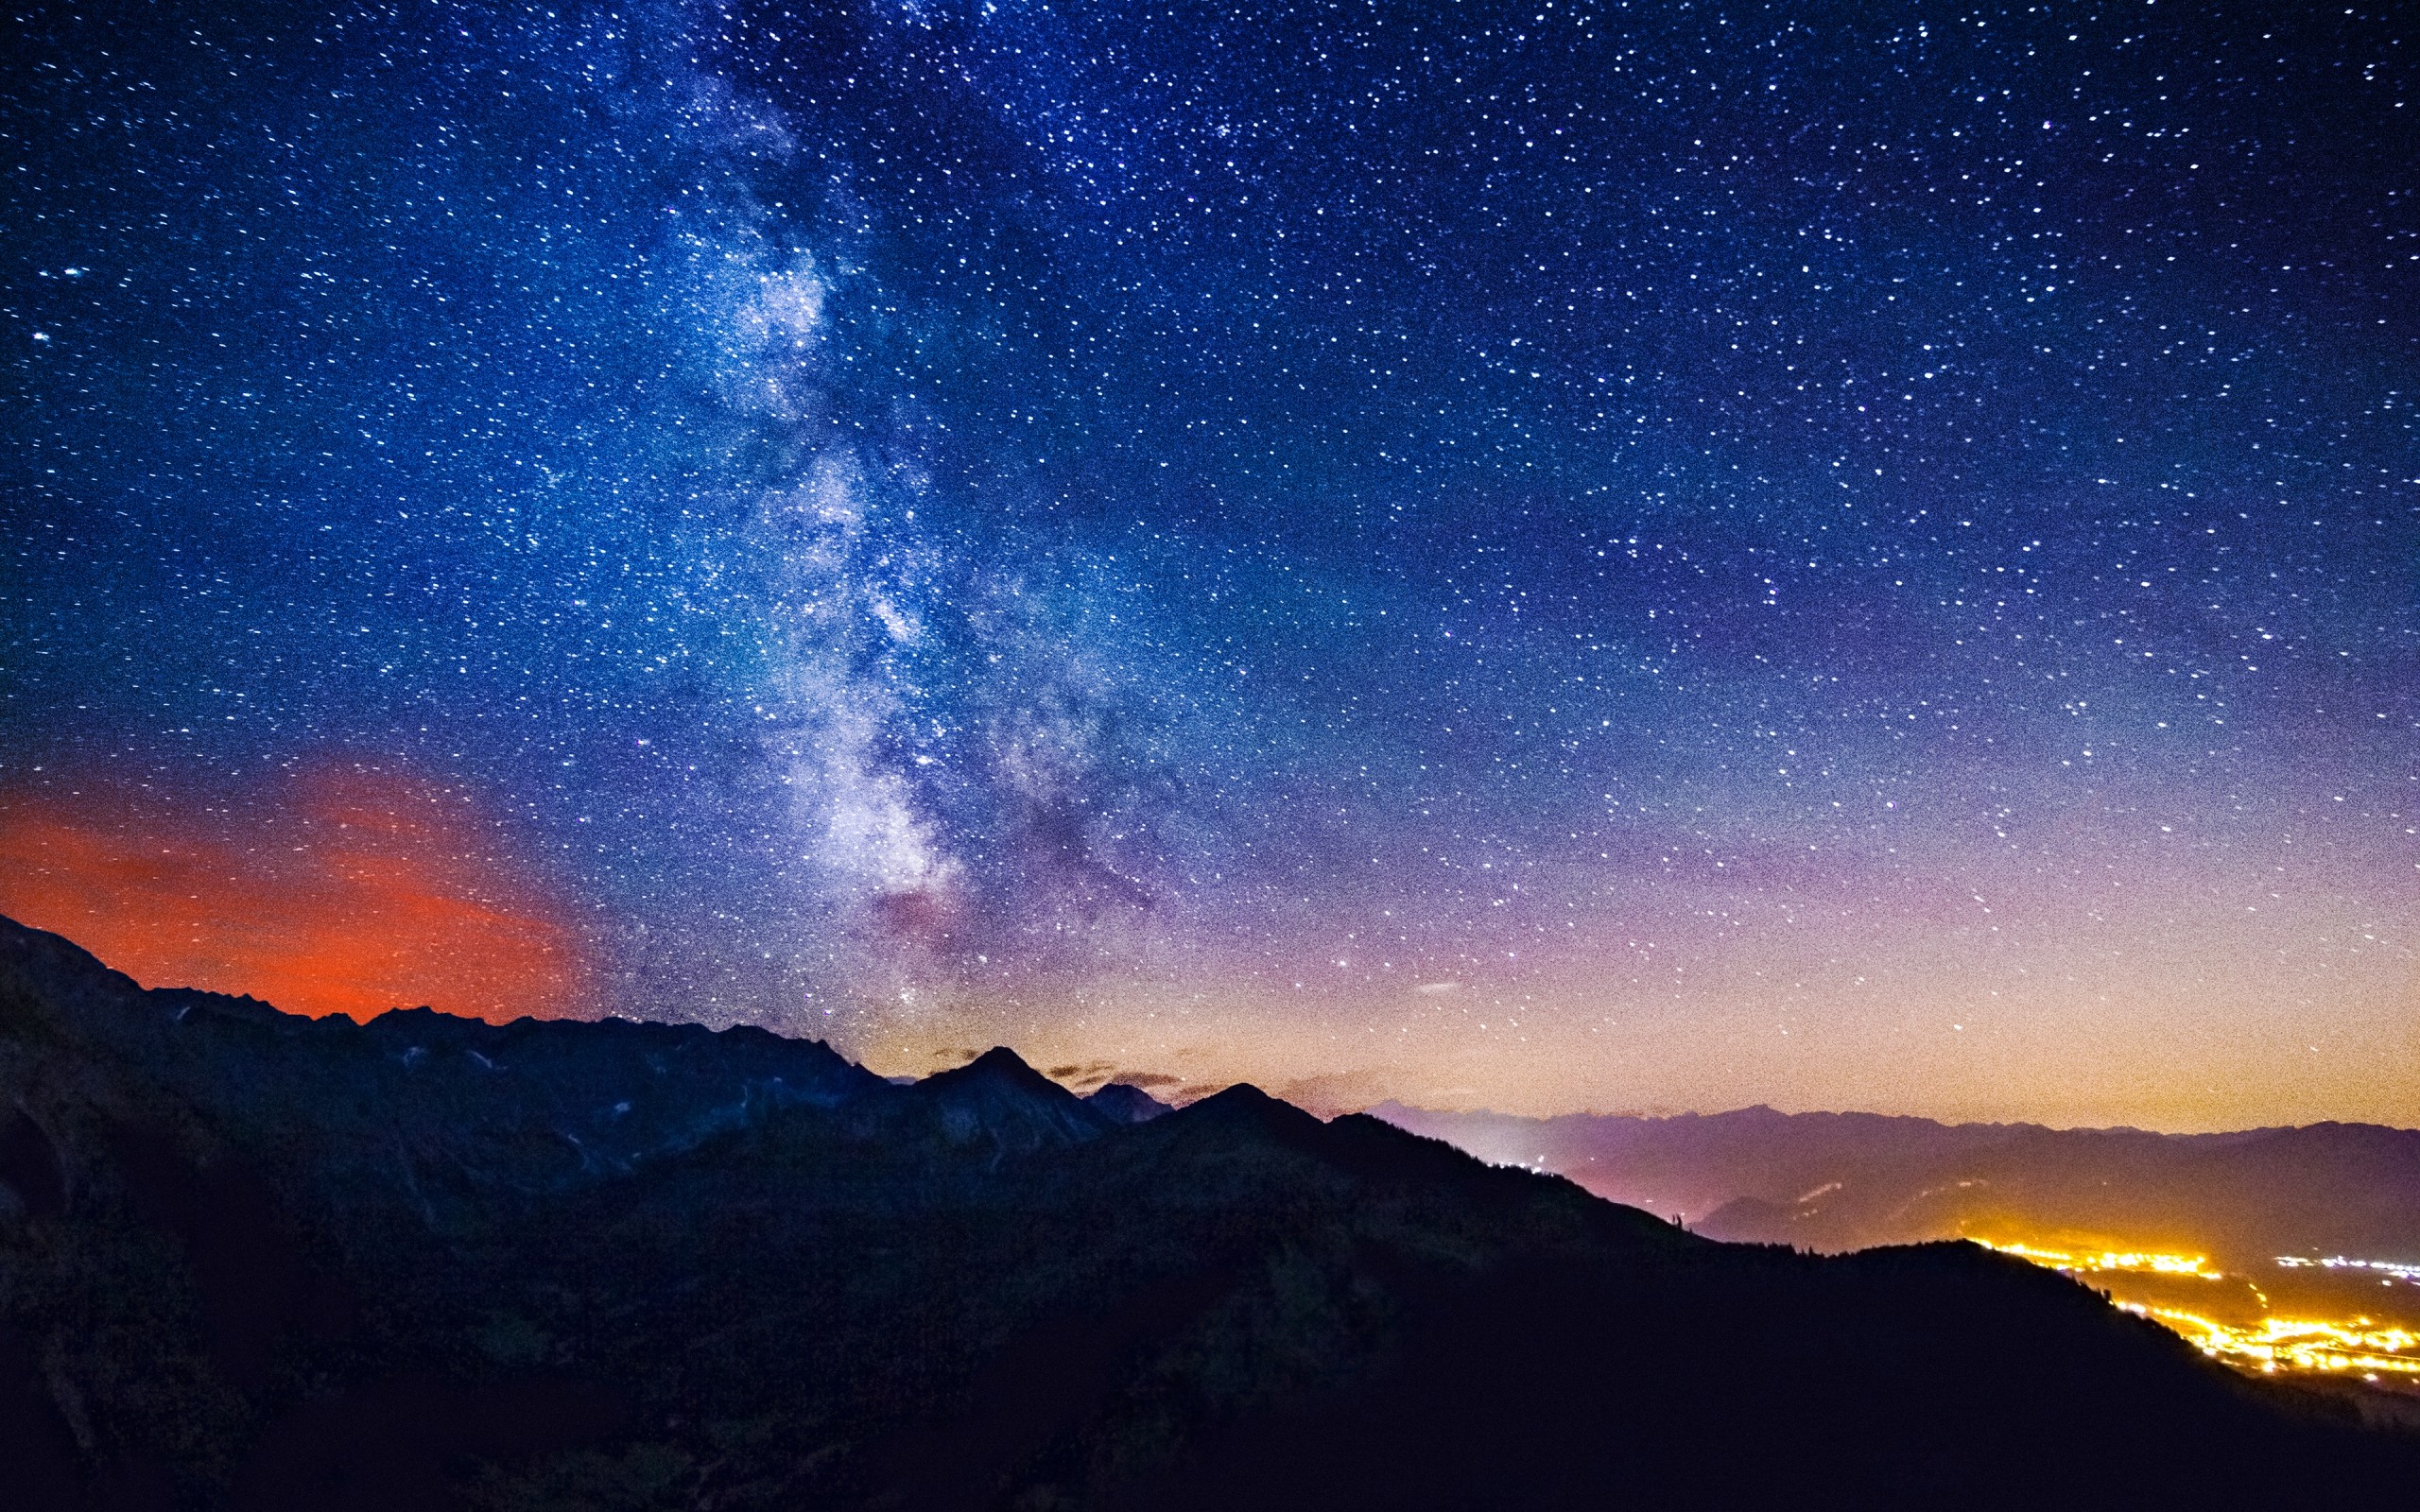 sunset, Mountains, Landscapes, Nature, Night, Stars, Galaxies, Hills, Milky, Way, Hdr, Photography Wallpaper